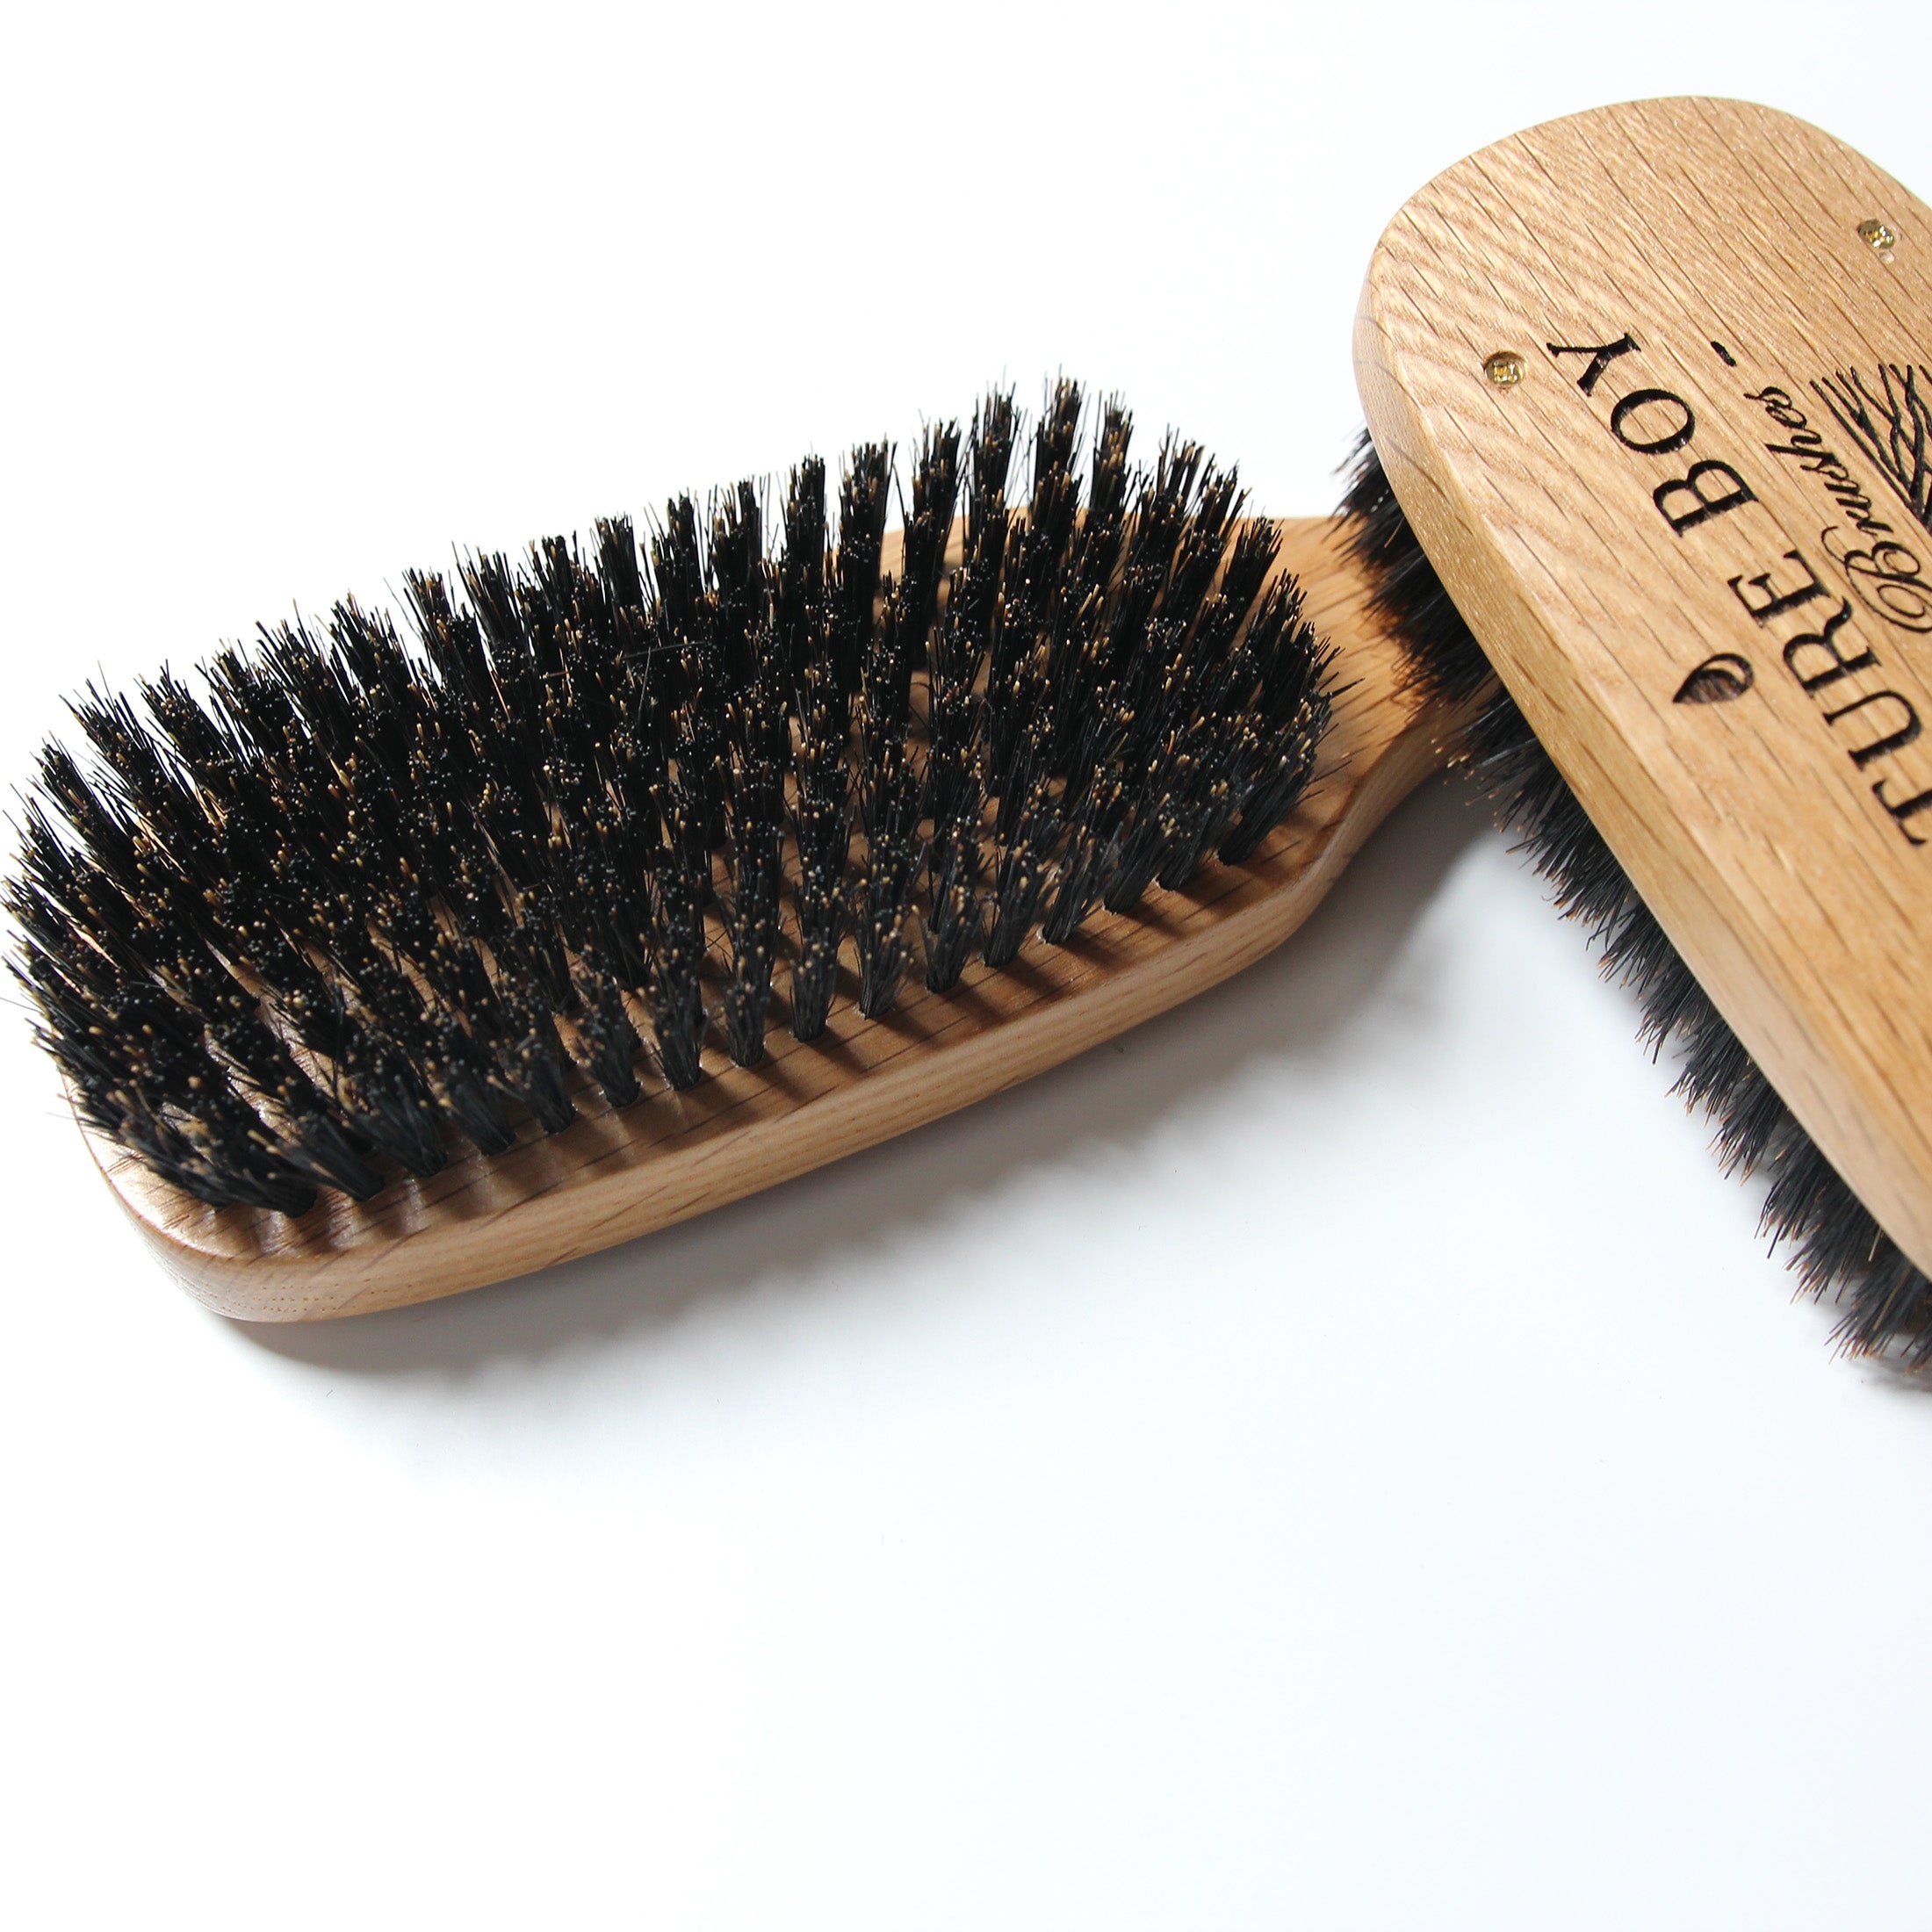 nature boy grooming products long handle boar bristle hair wave brush firm oak wood 100% natural 3